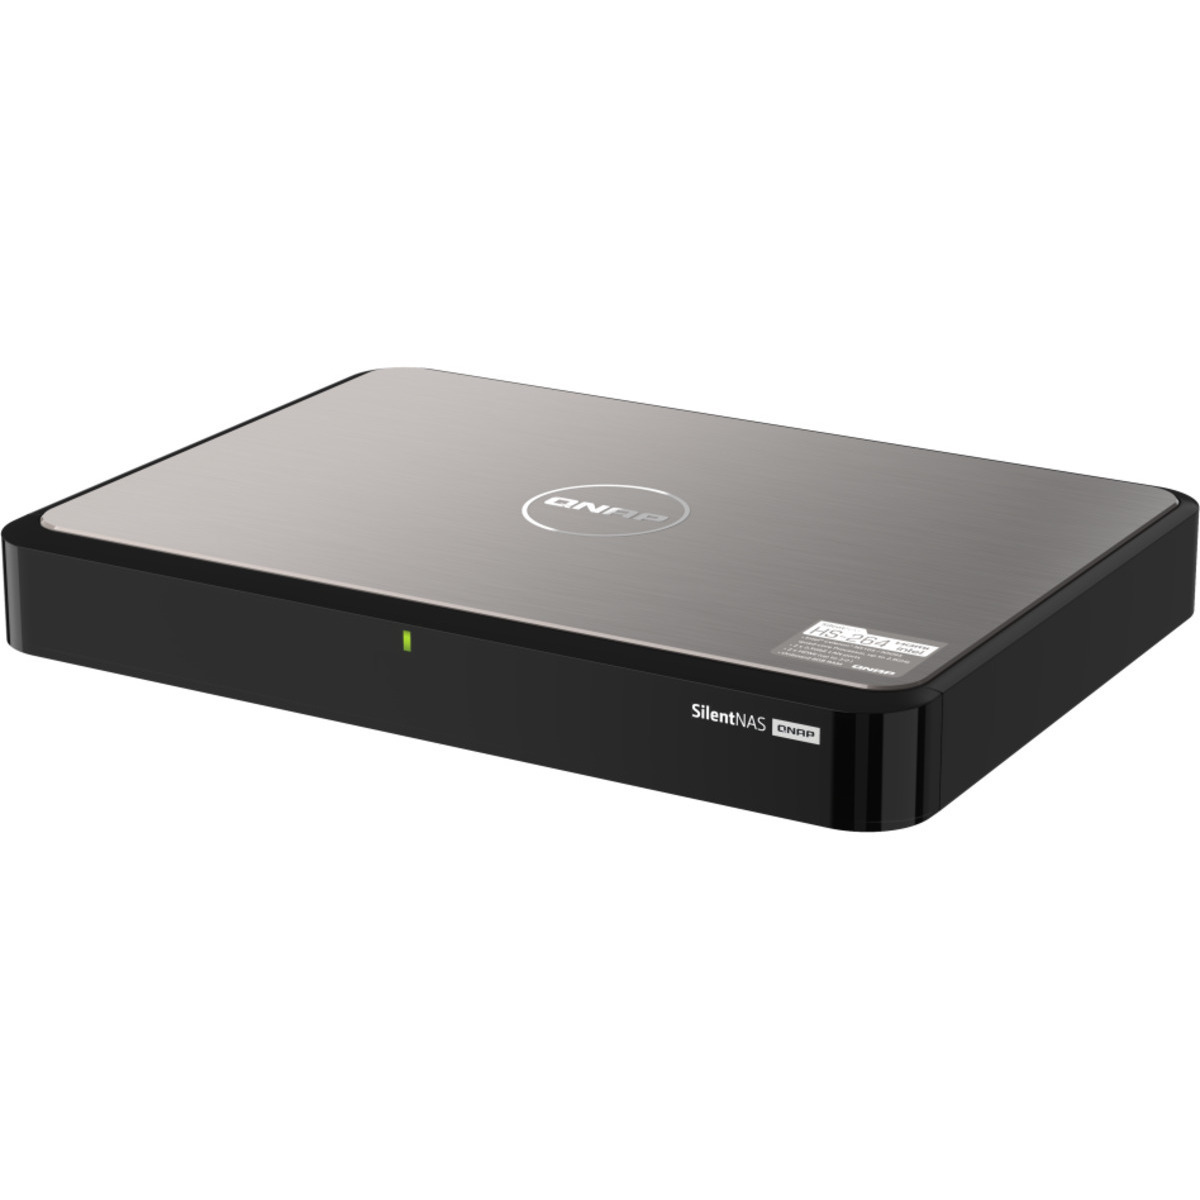 QNAP HS-264 2tb 2-Bay Desktop Multimedia / Power User / Business NAS - Network Attached Storage Device 1x2tb Samsung 870 EVO MZ-77E2T0BAM 2.5 560/530MB/s SATA 6Gb/s SSD CONSUMER Class Drives Installed - Burn-In Tested HS-264